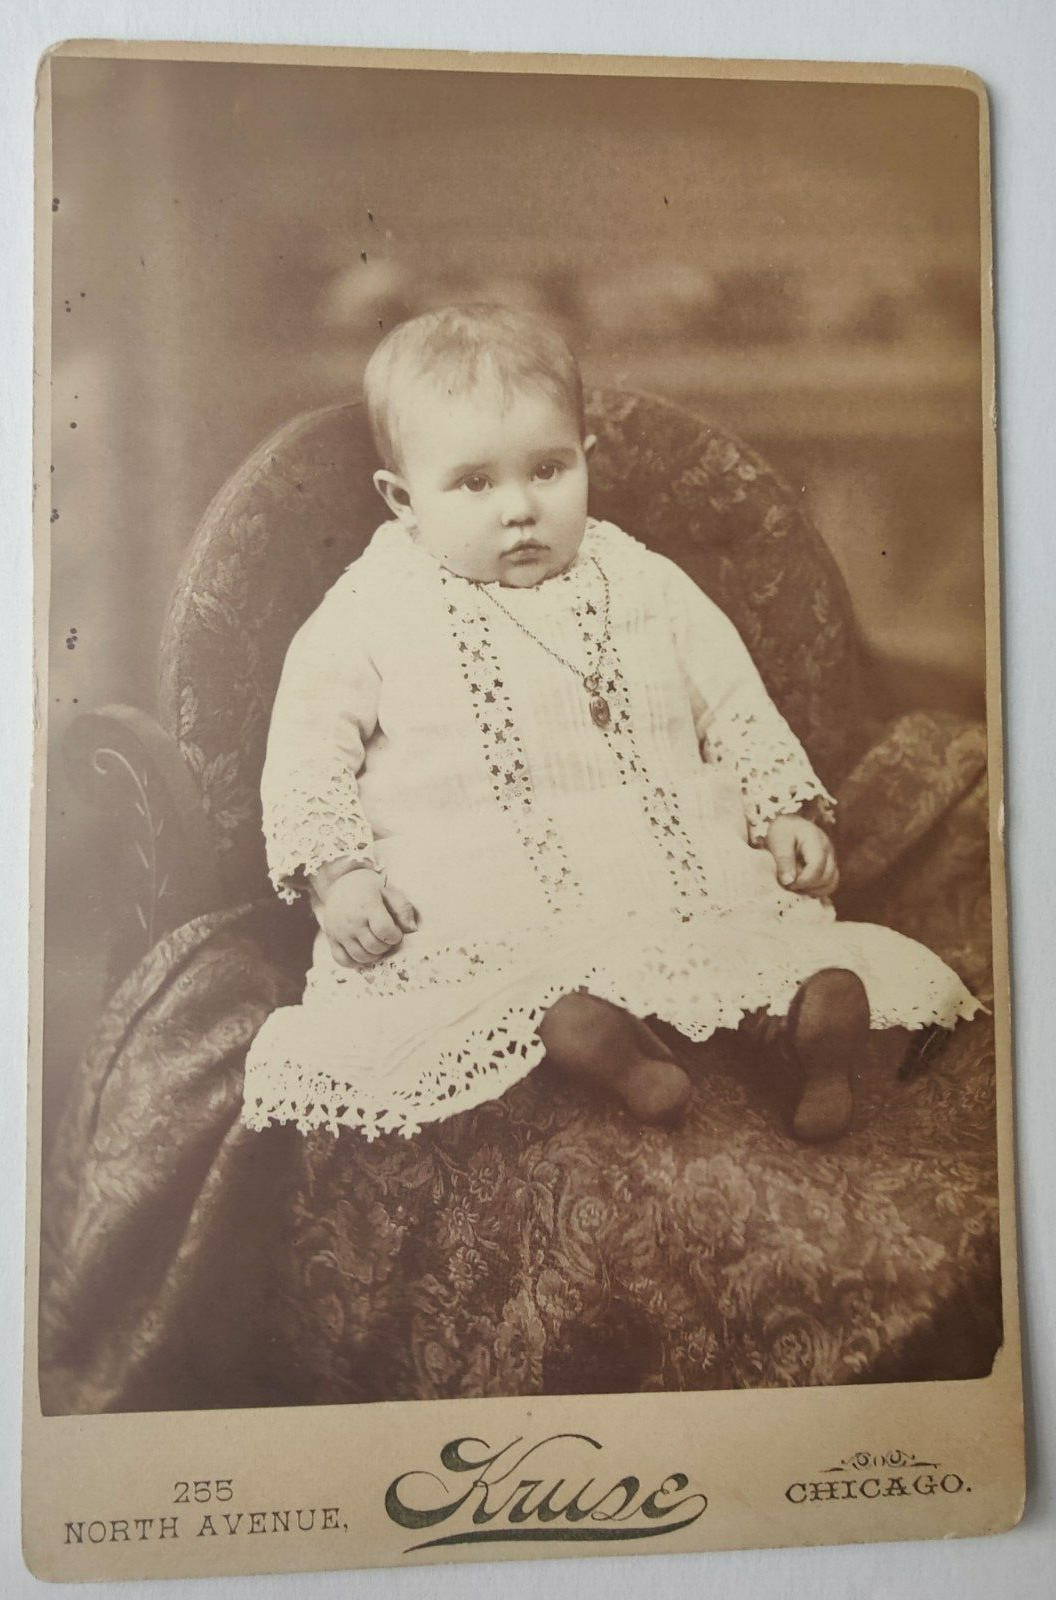 Vintage Cabinet Card Baby in Lace Gown by Kruse in Chicago, Illinois